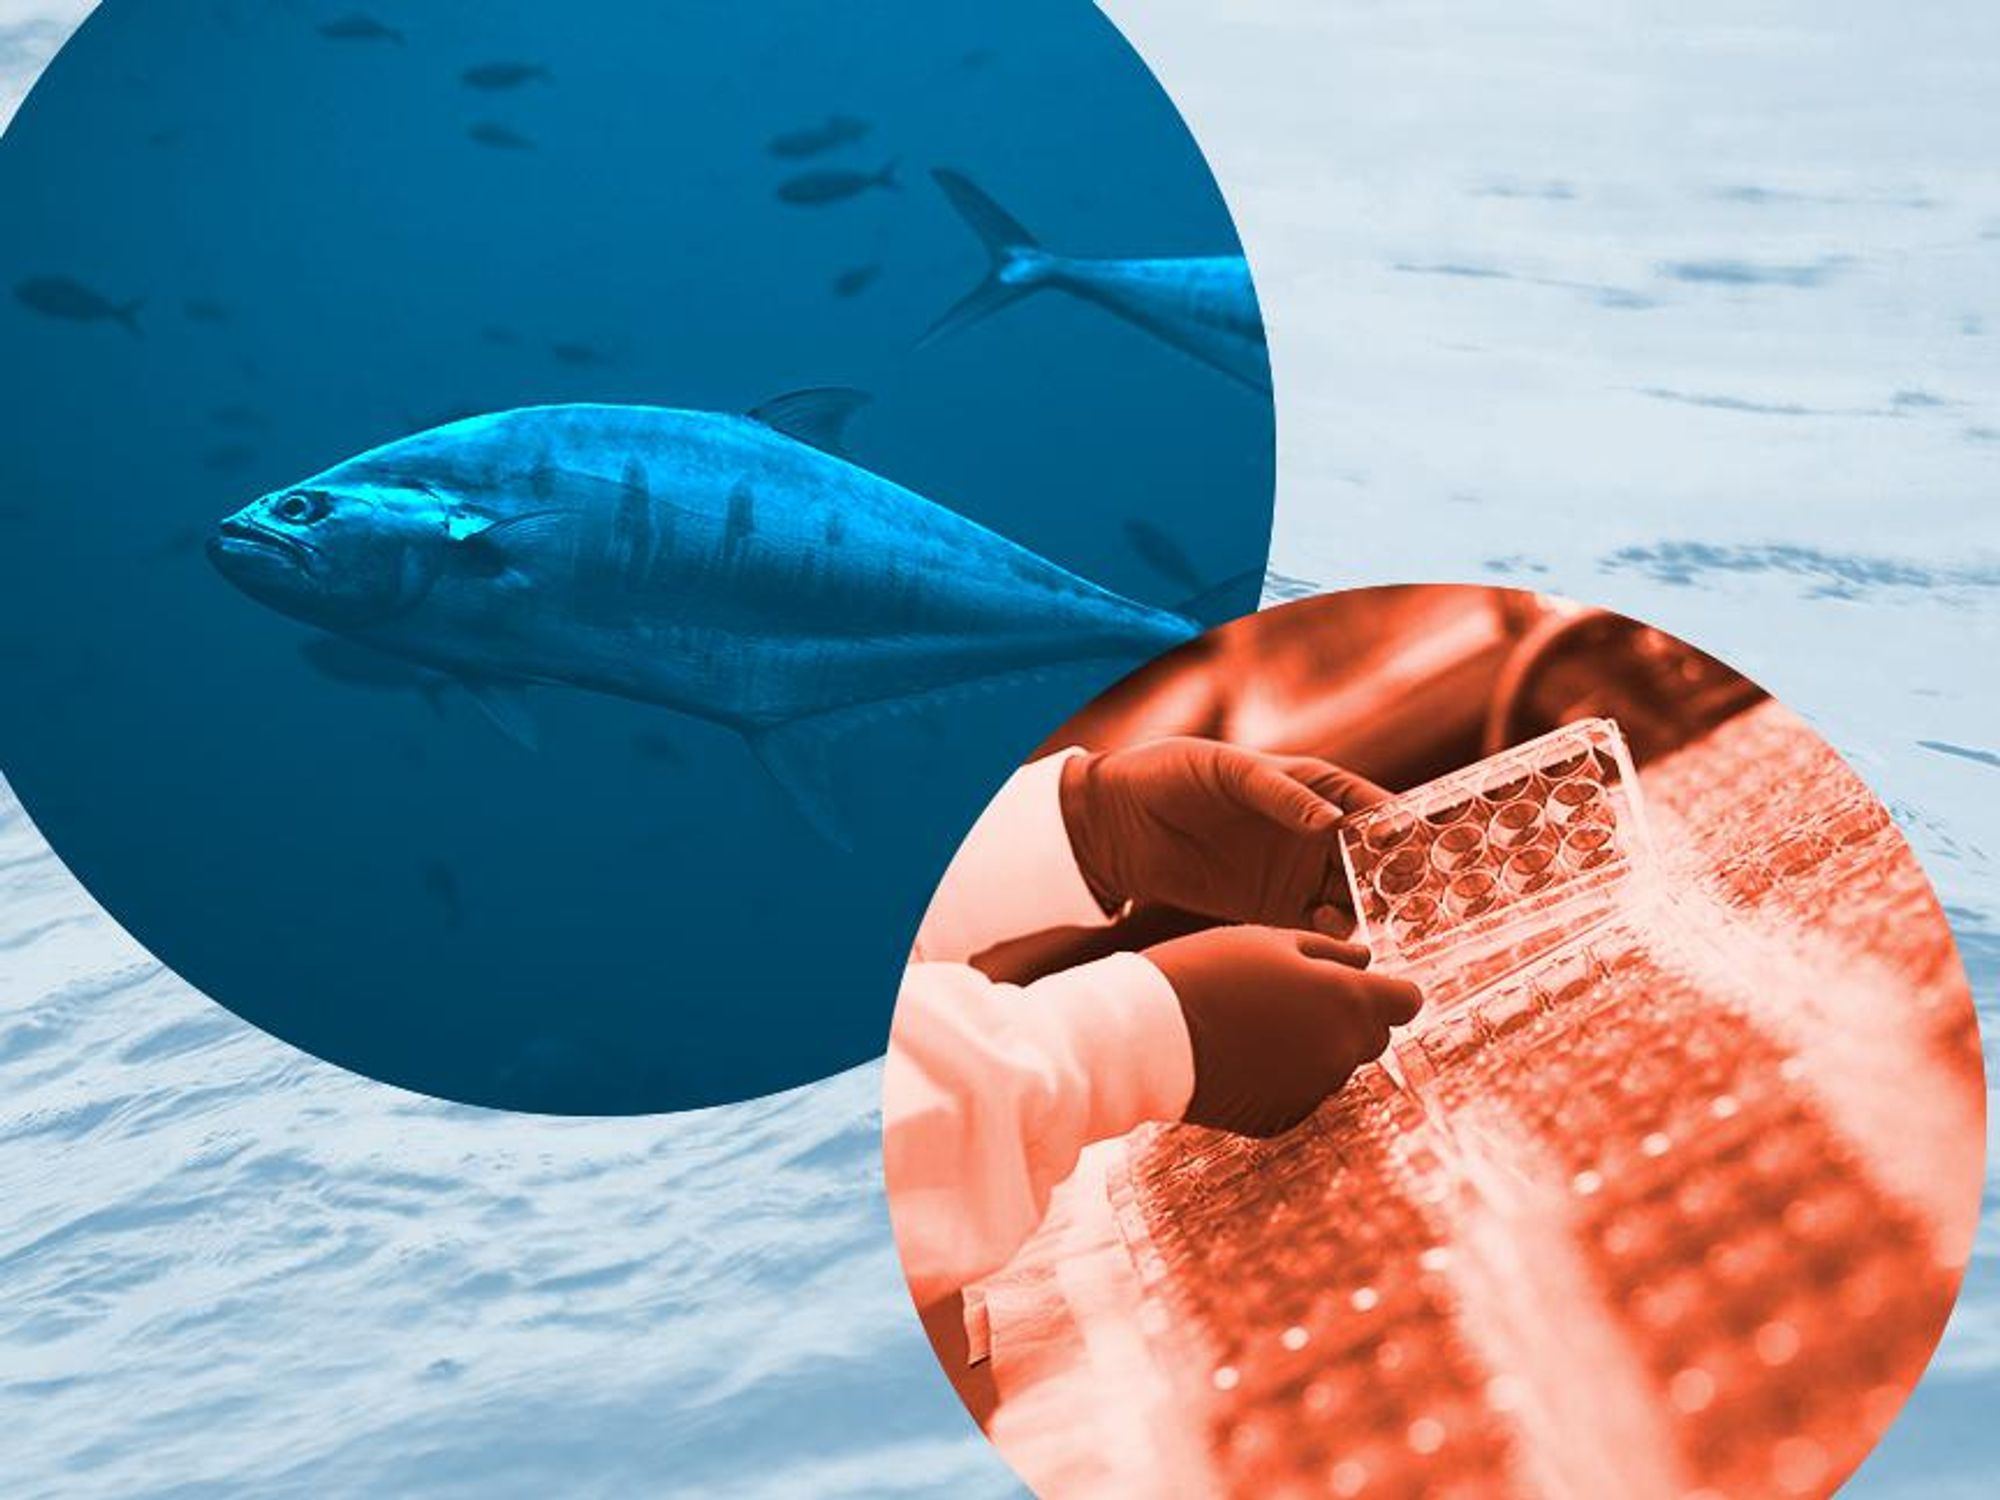 Cell-Cultured Tuna Is Making Its Way to Restaurants, Marking a Sea-Change for the Seafood Industry